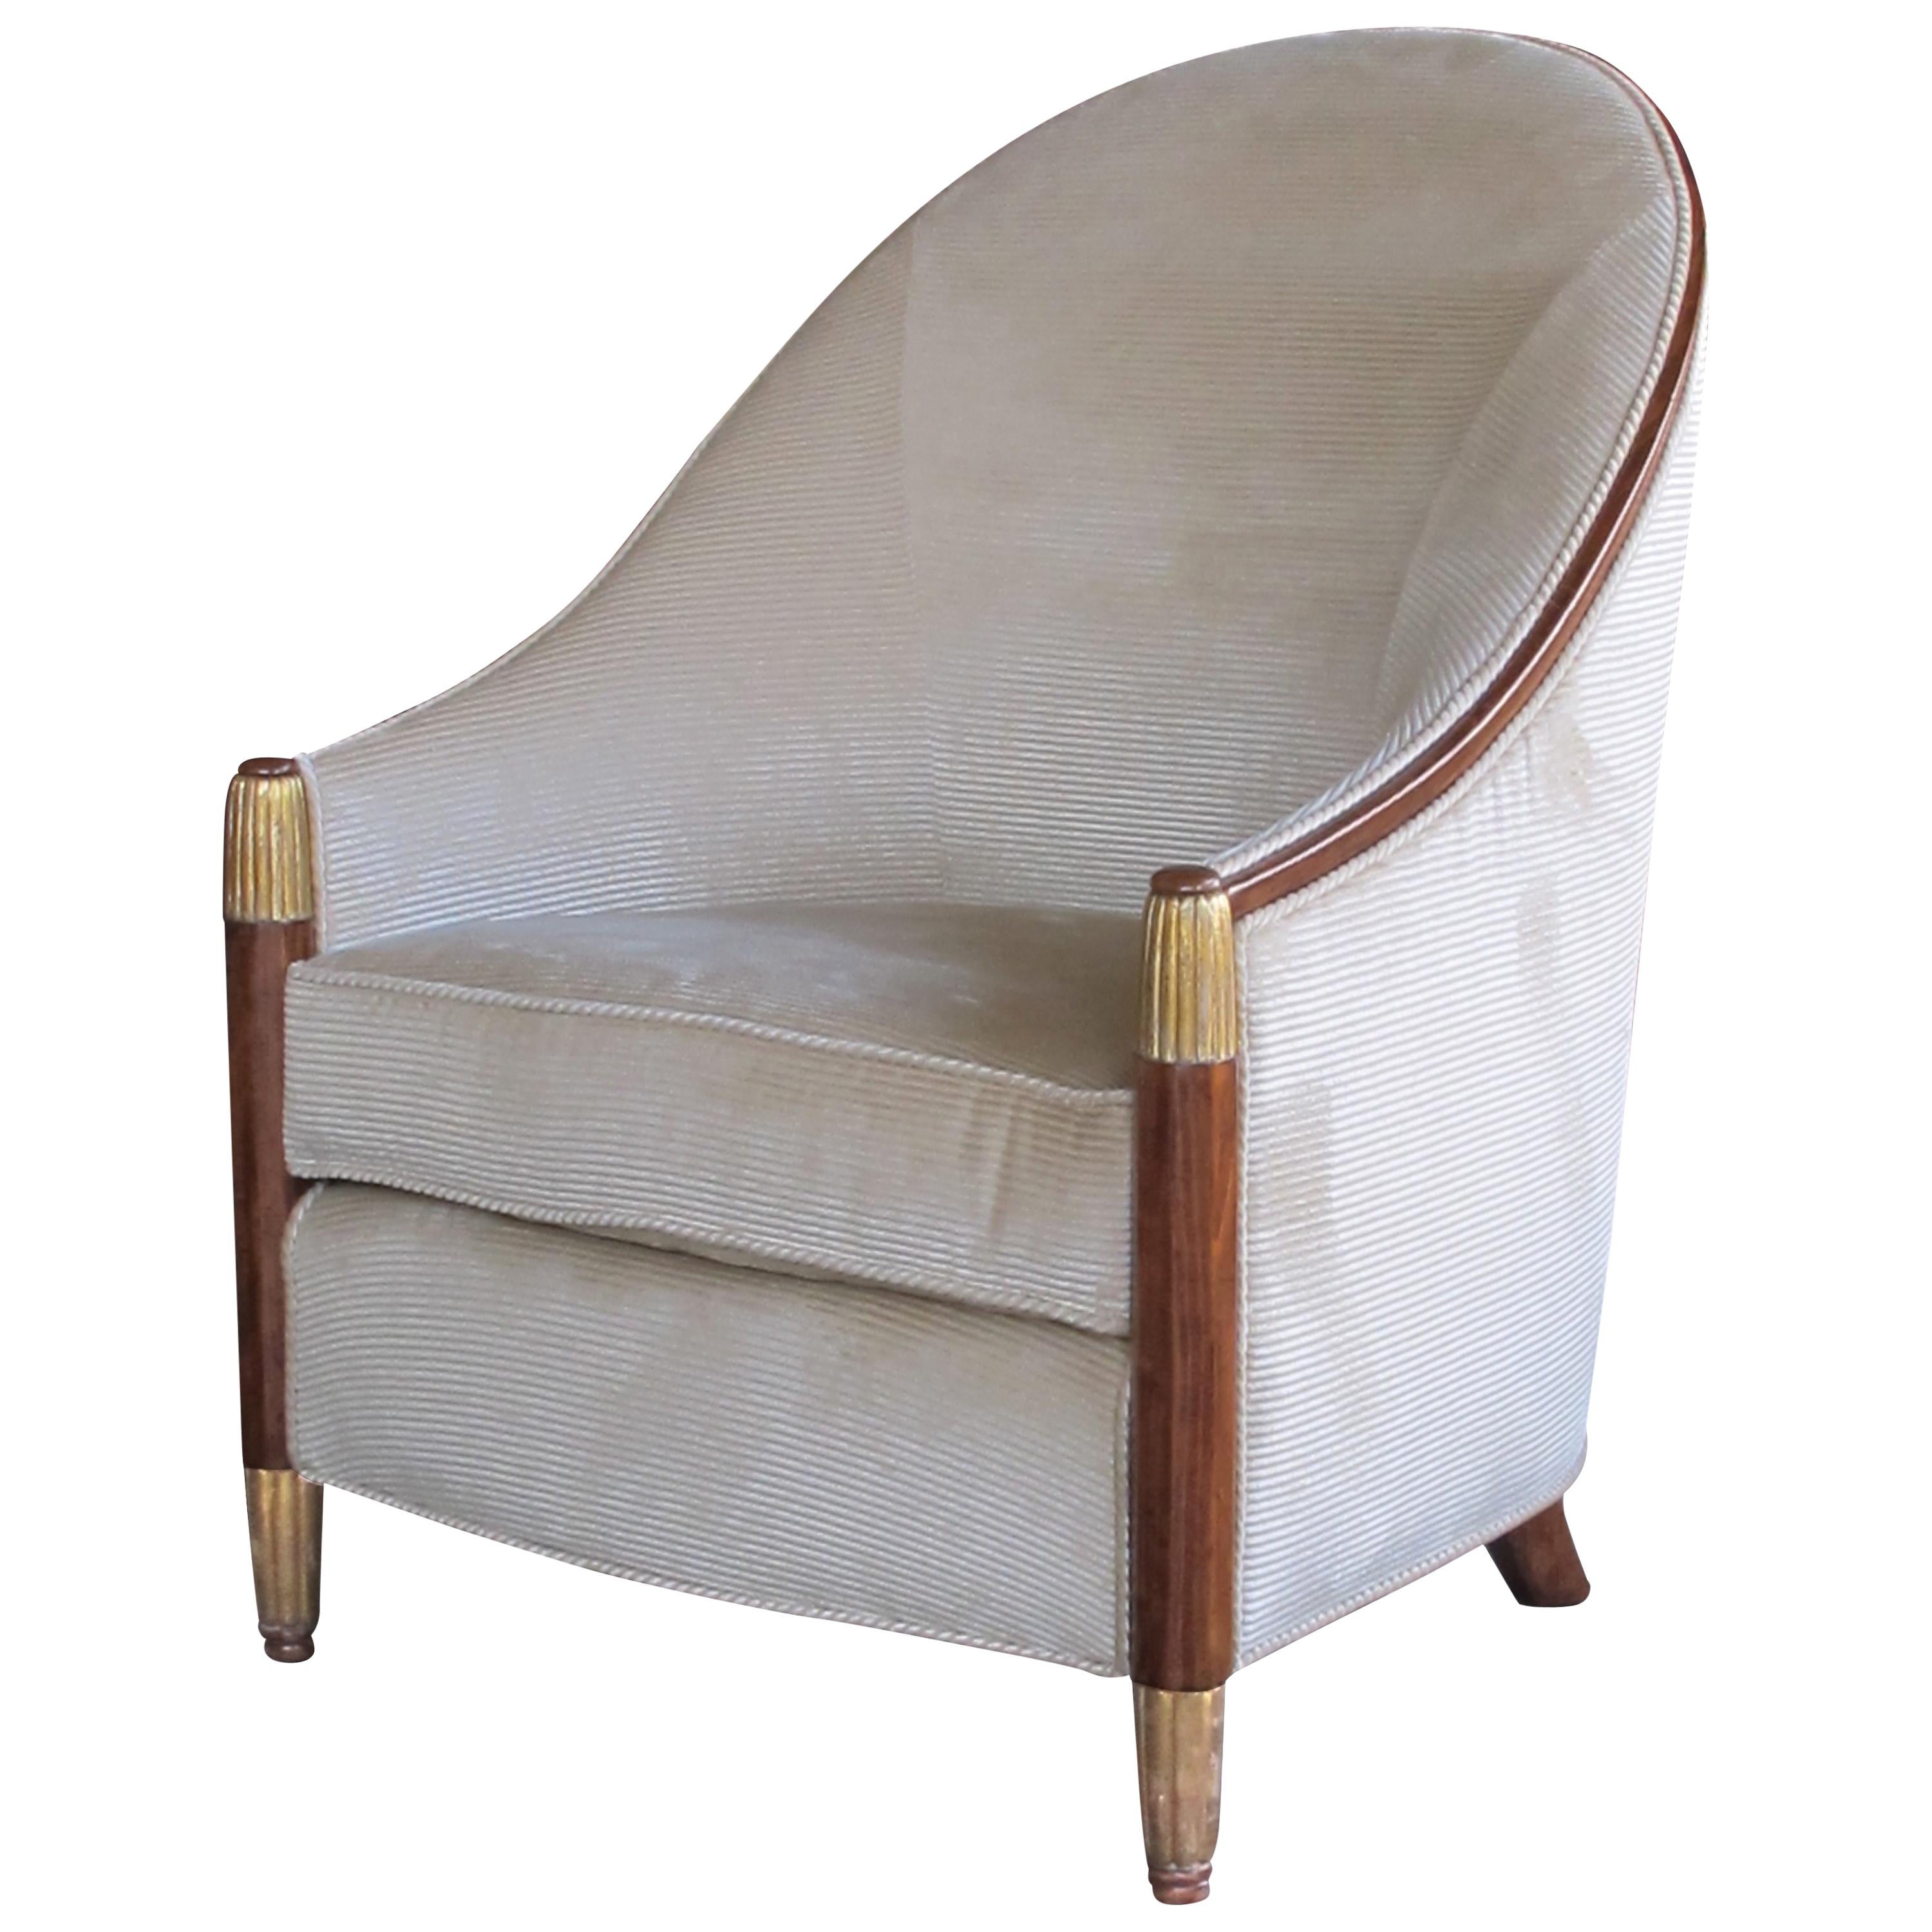 Elegant French Art Deco Bergere with Sweeping Back, in the Style of Paul Follot